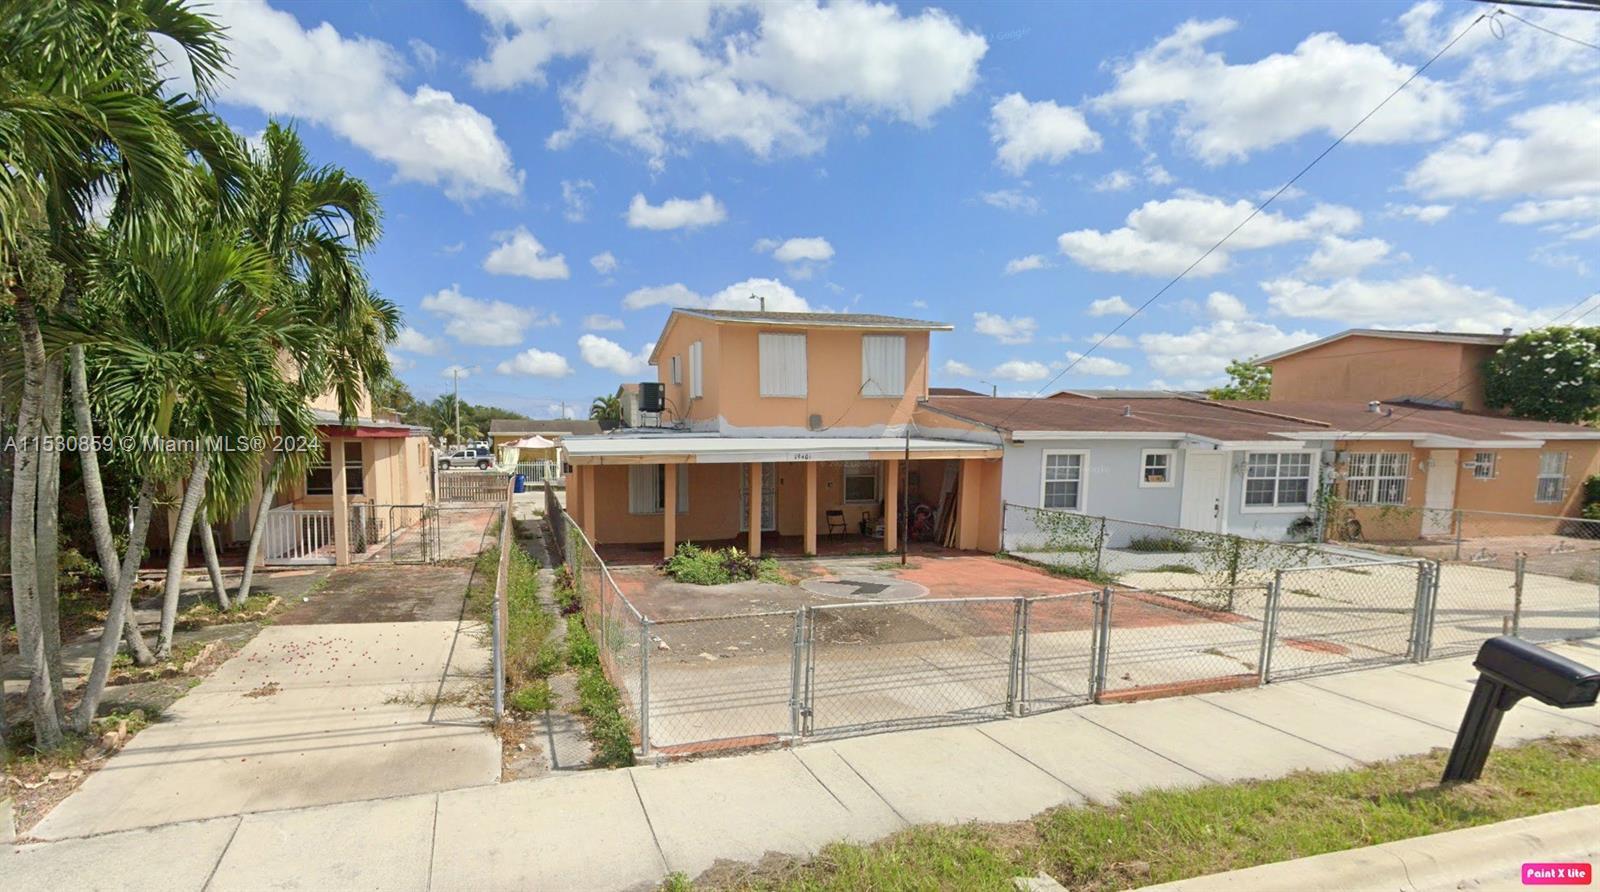 Photo of 19401 NW 47th Ave in Miami Gardens, FL